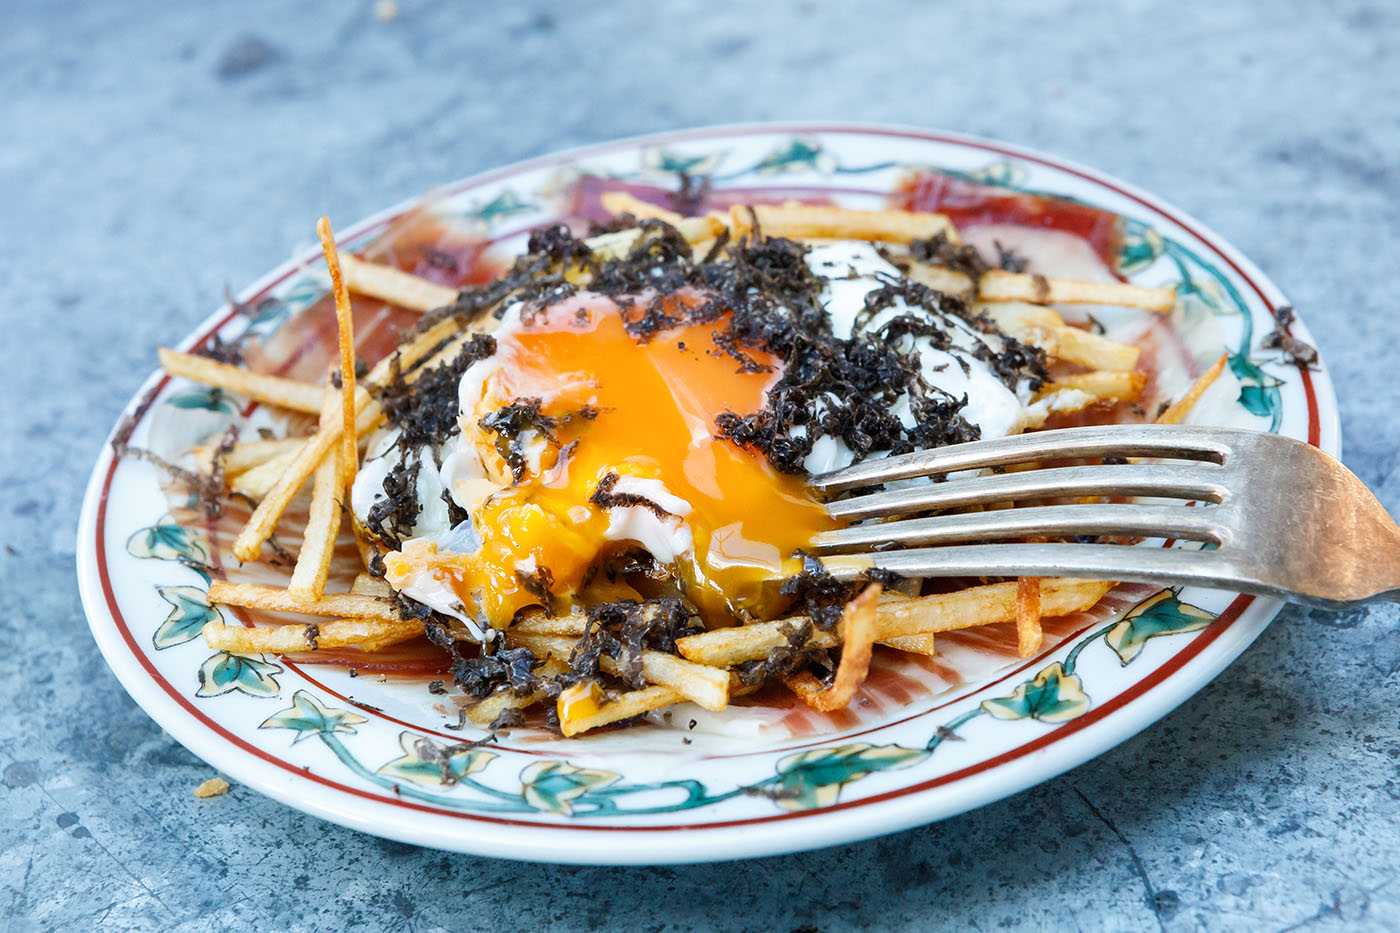 Fried Egg with Chips, Jamón Ibérico and Black Truffle